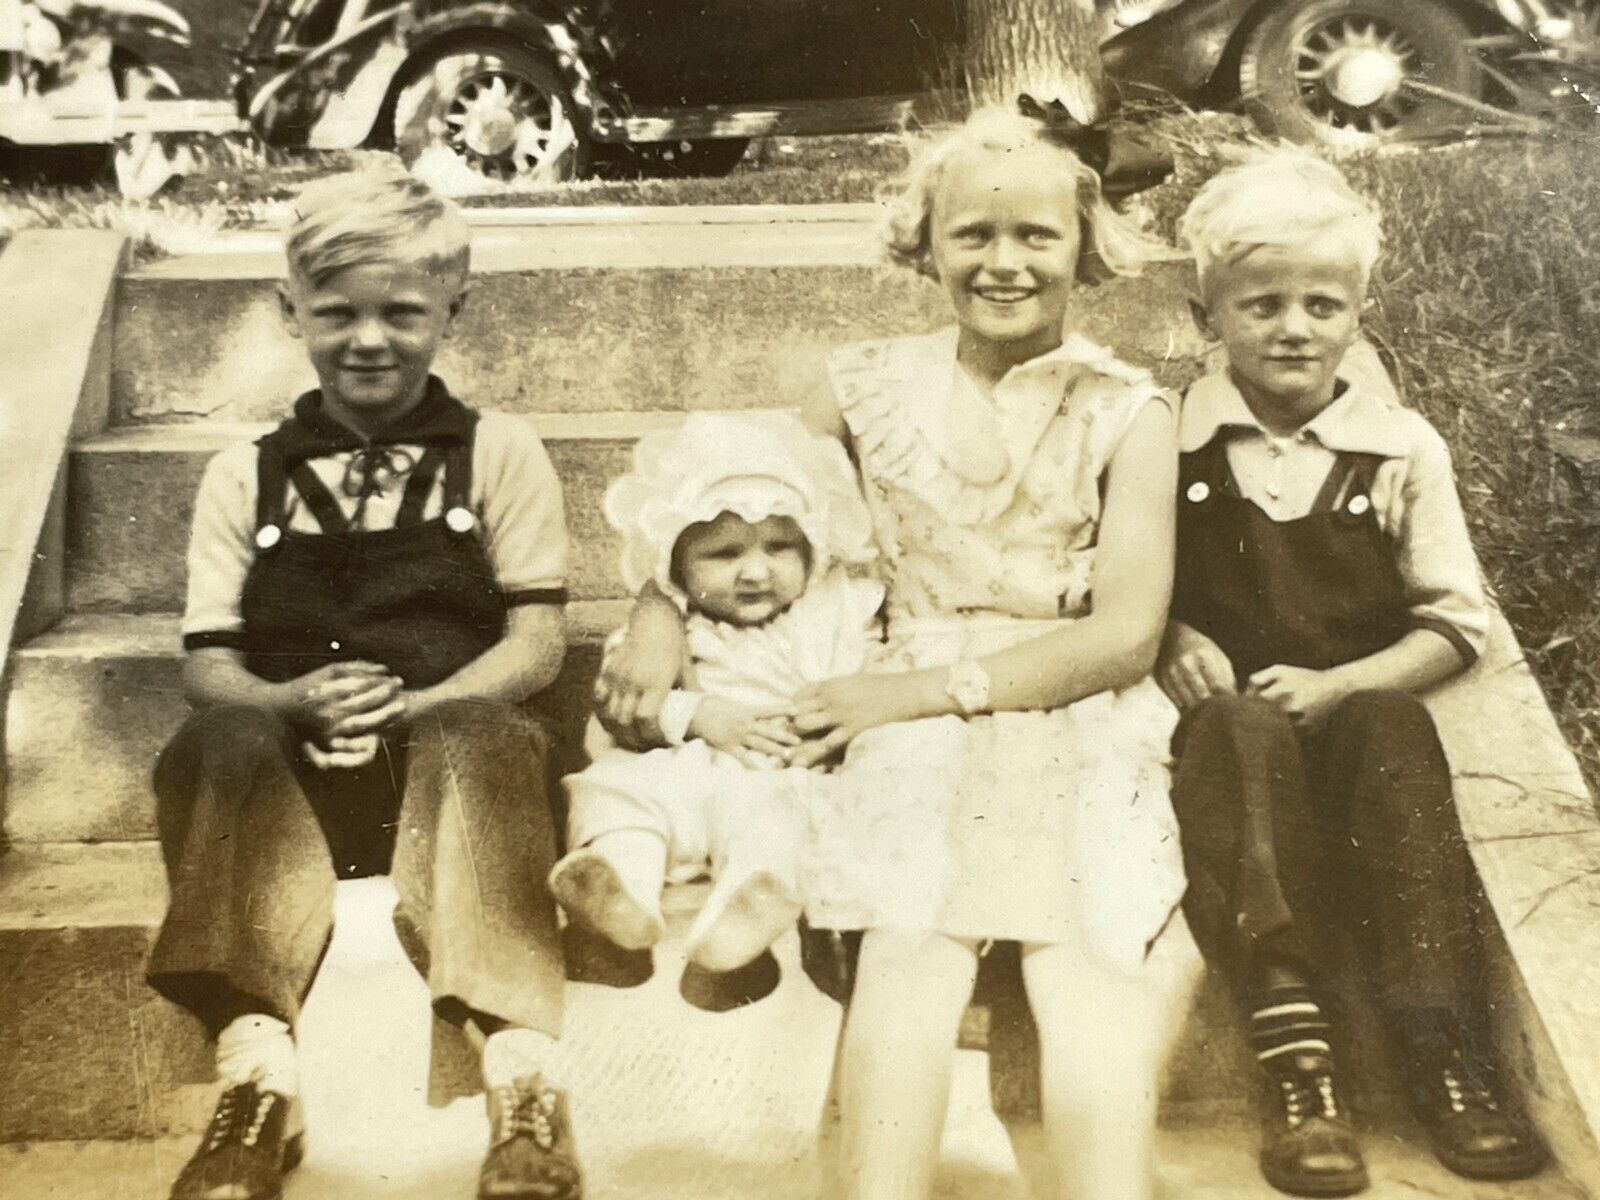 O8 Photograph Kids 1930's Family Photo Siblings Portrait Brother Sister